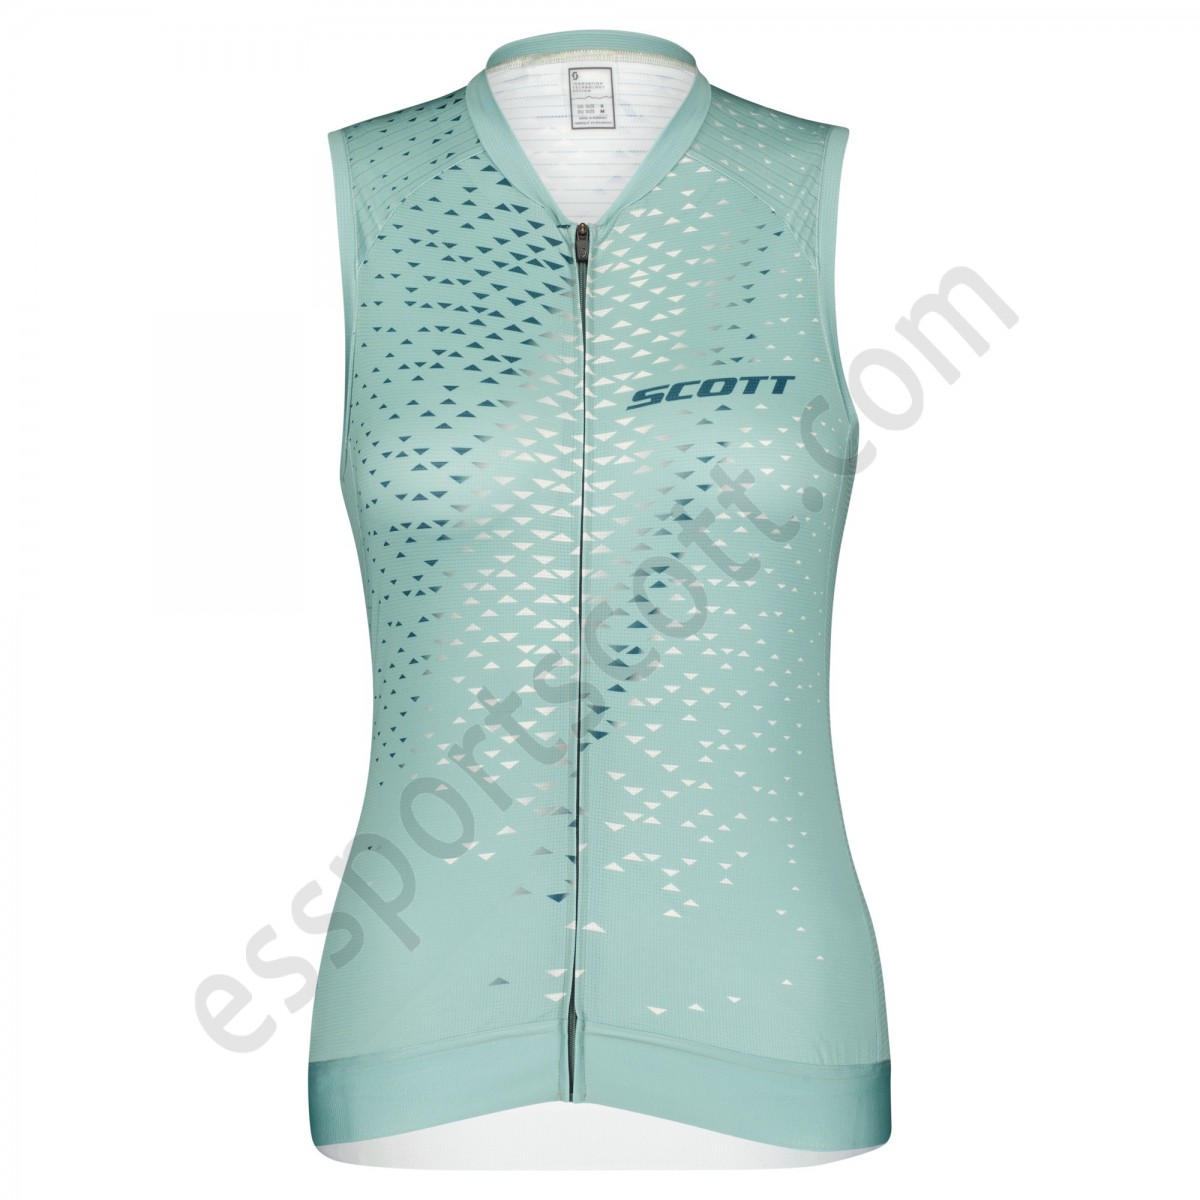 Scott Descuento ◇ Maillot sin mangas para mujer RC Pro - -0